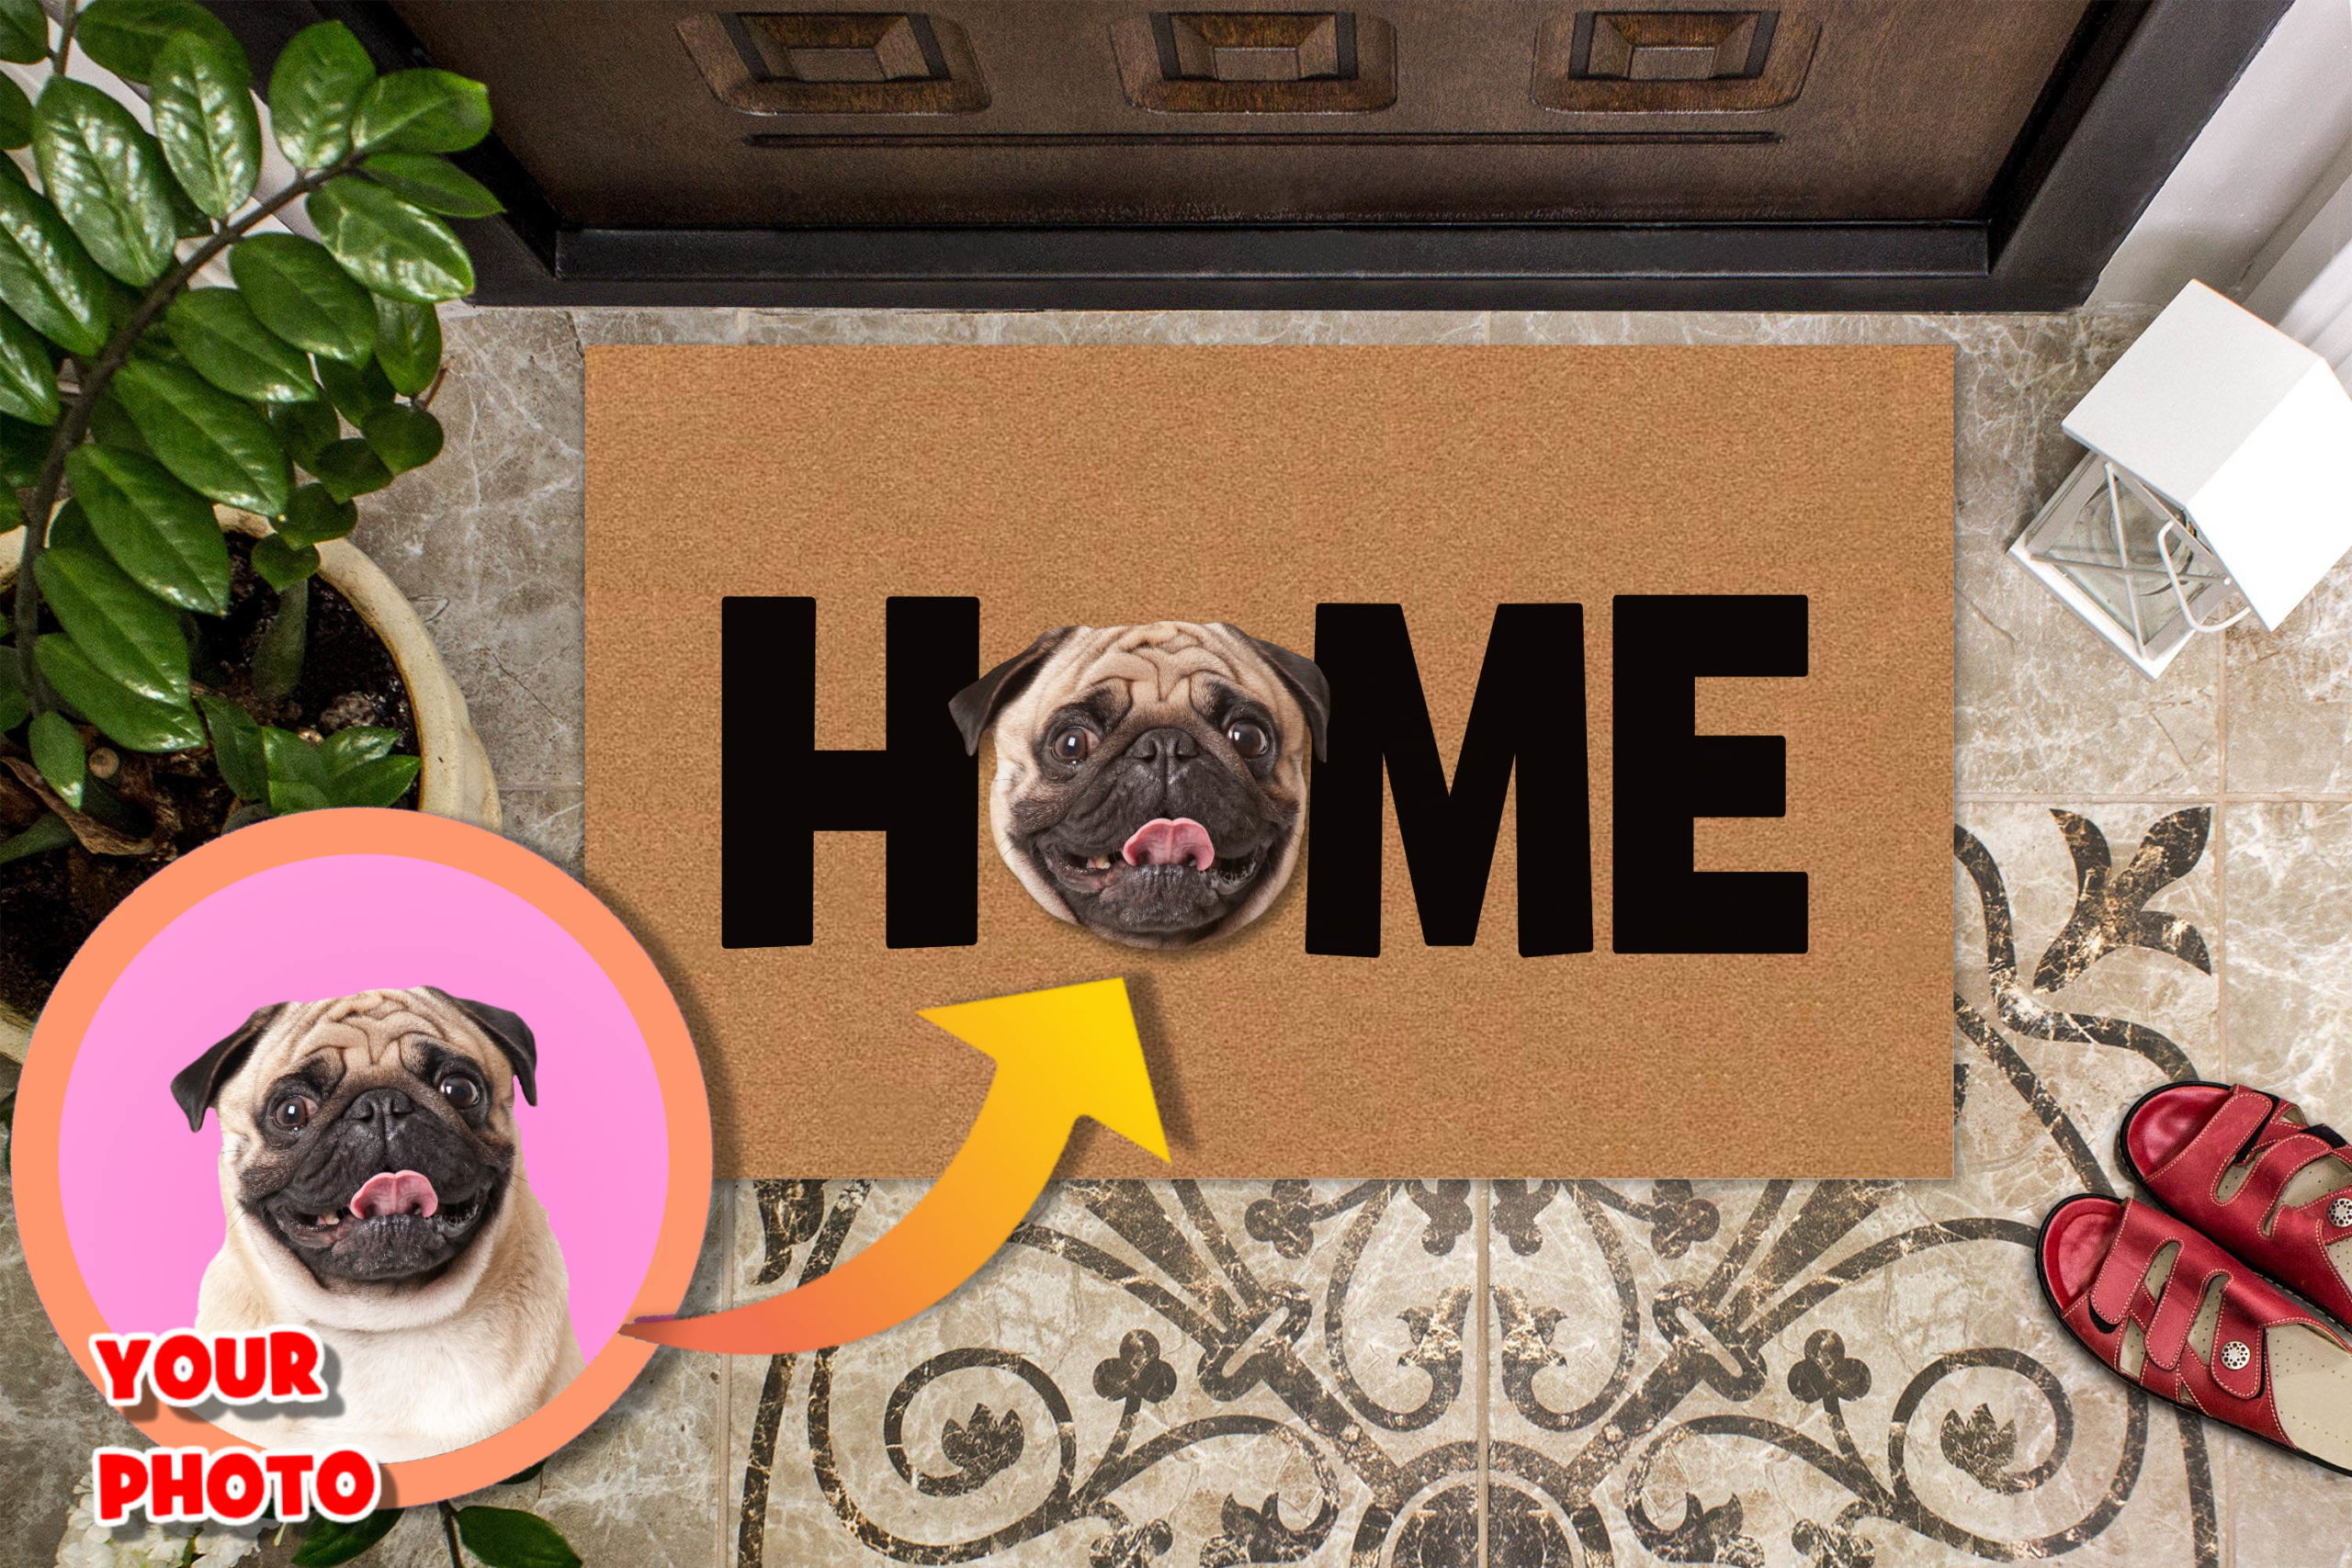 https://passionify.com/wp-content/uploads/2020/06/Custom-Dog-Face-Photo-HOME-Welcome-Doormat-Housewarming-Gift-scaled.jpg